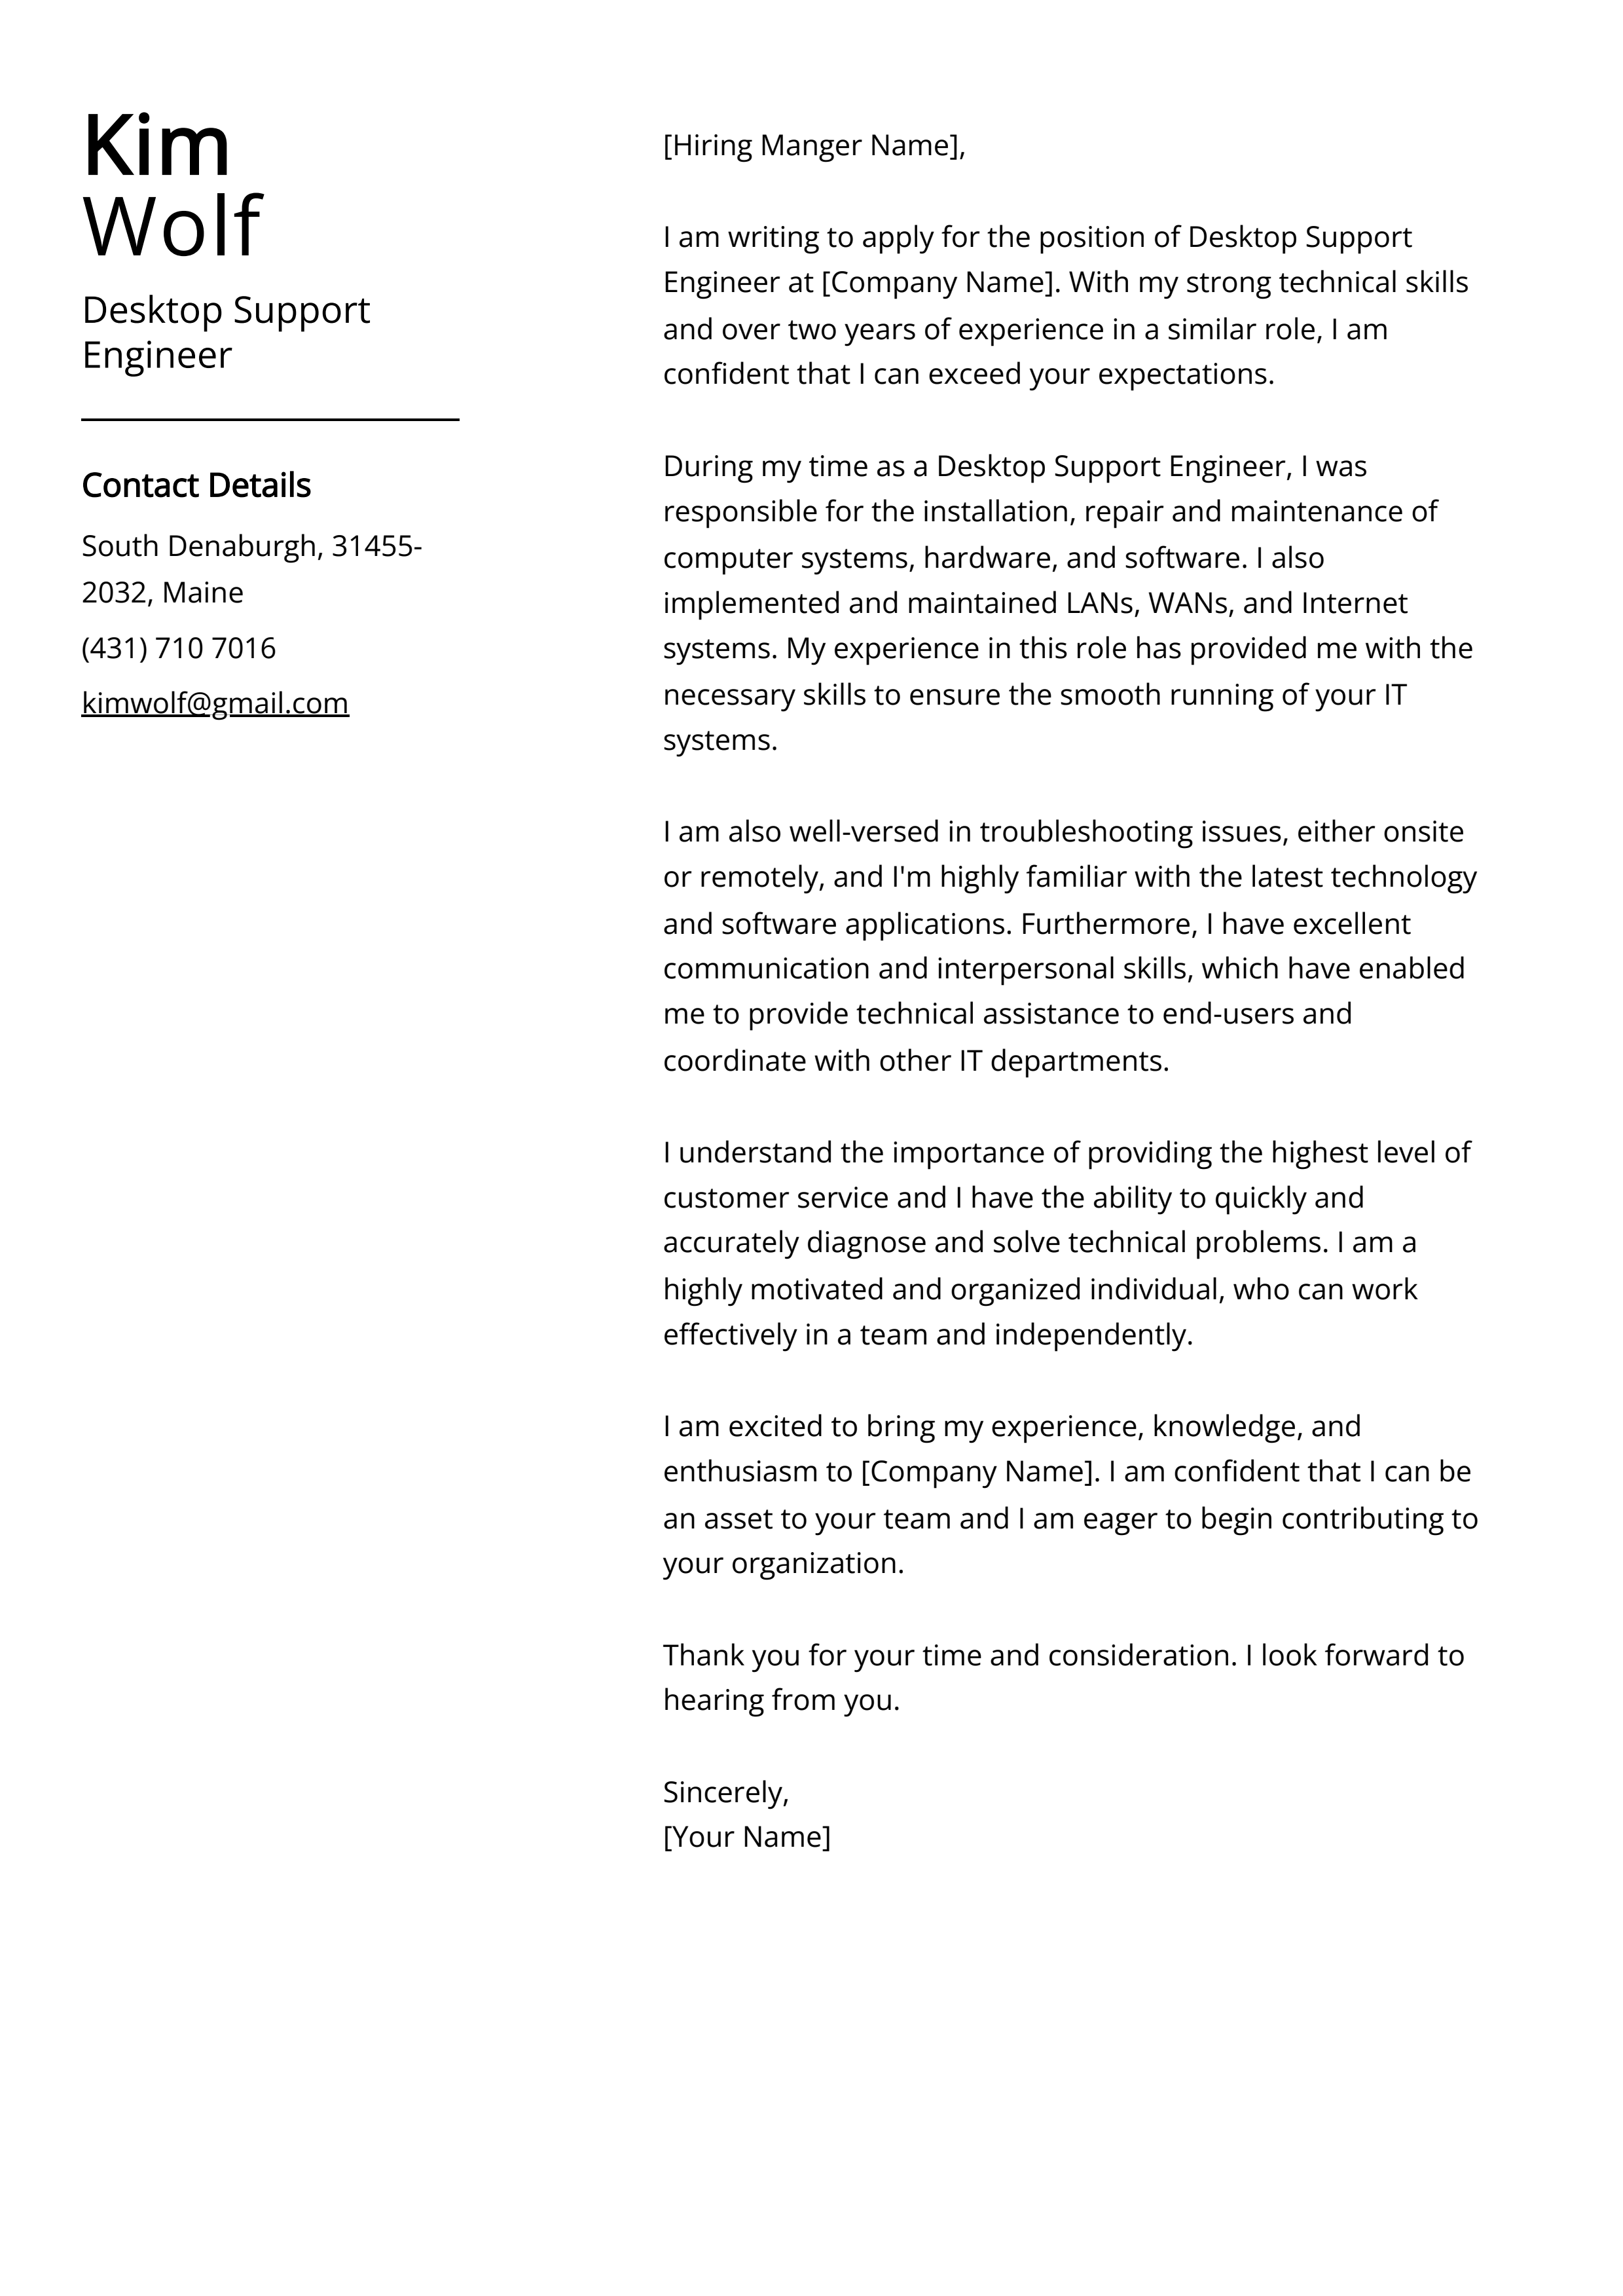 Desktop Support Engineer Cover Letter Example